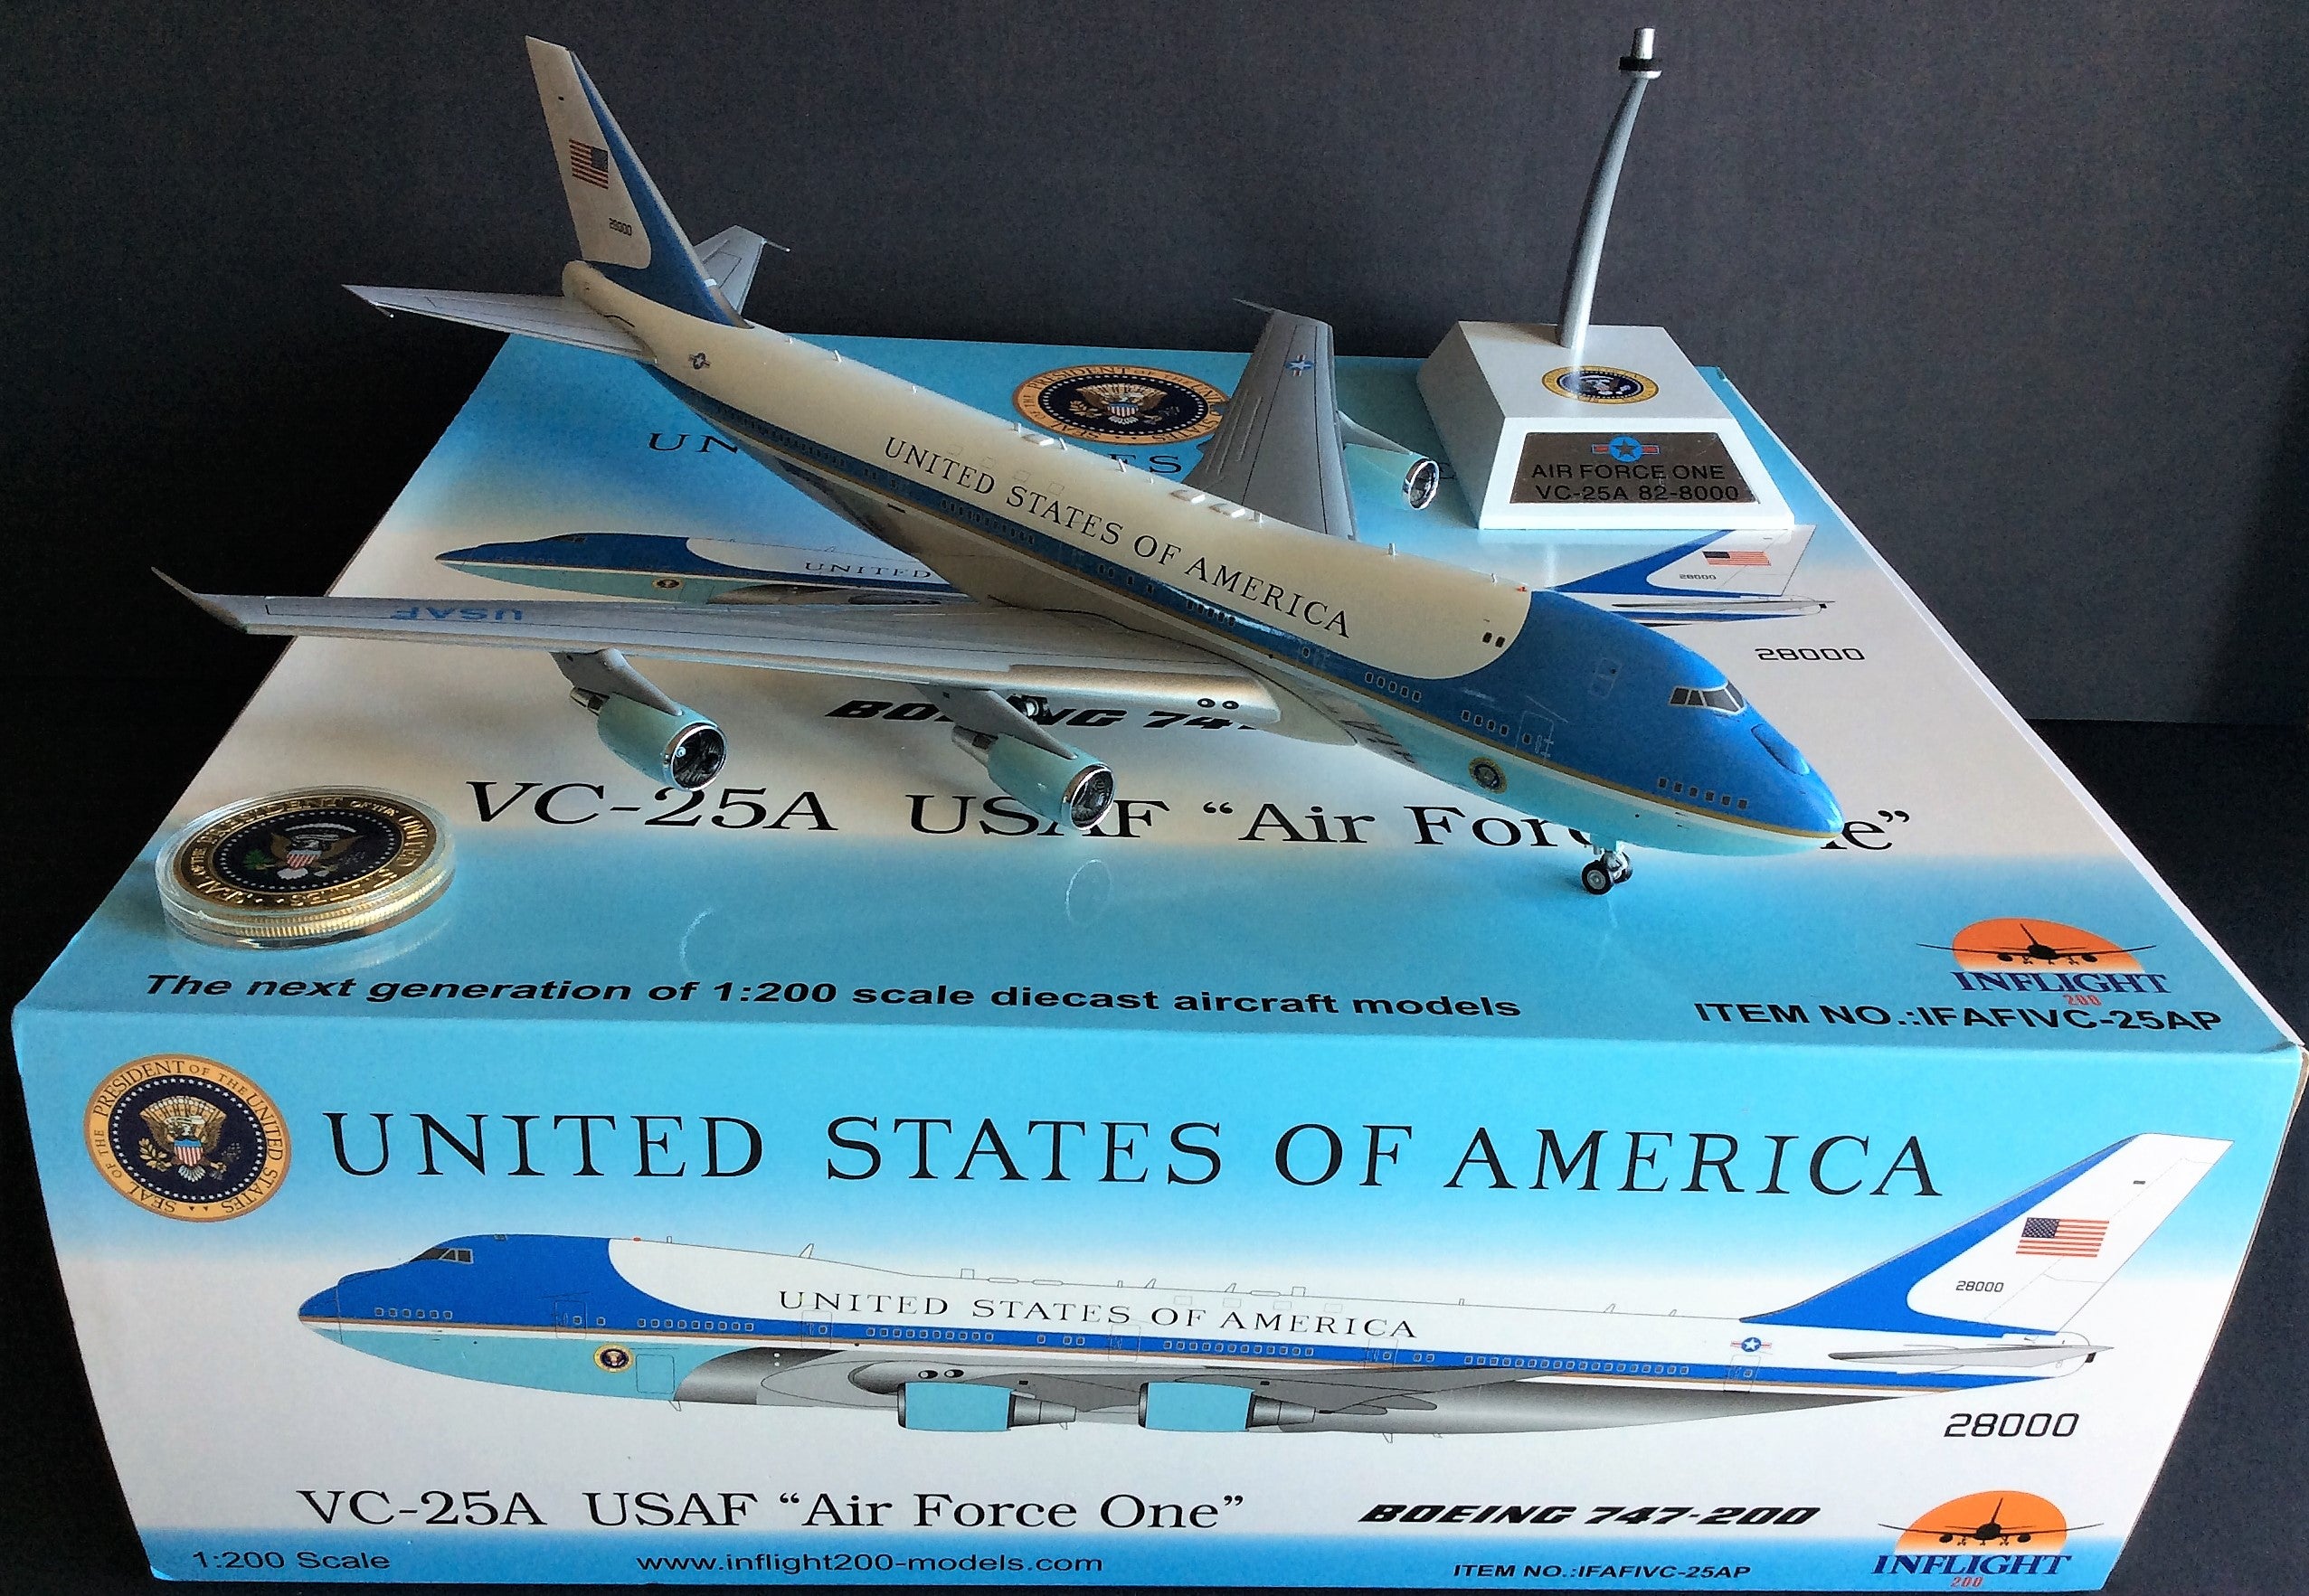 INFLIGHT IFAFIVC-25AP 1/200 USA AIR FORCE BOEING VC-25A 747-200 28000 POLISHED 